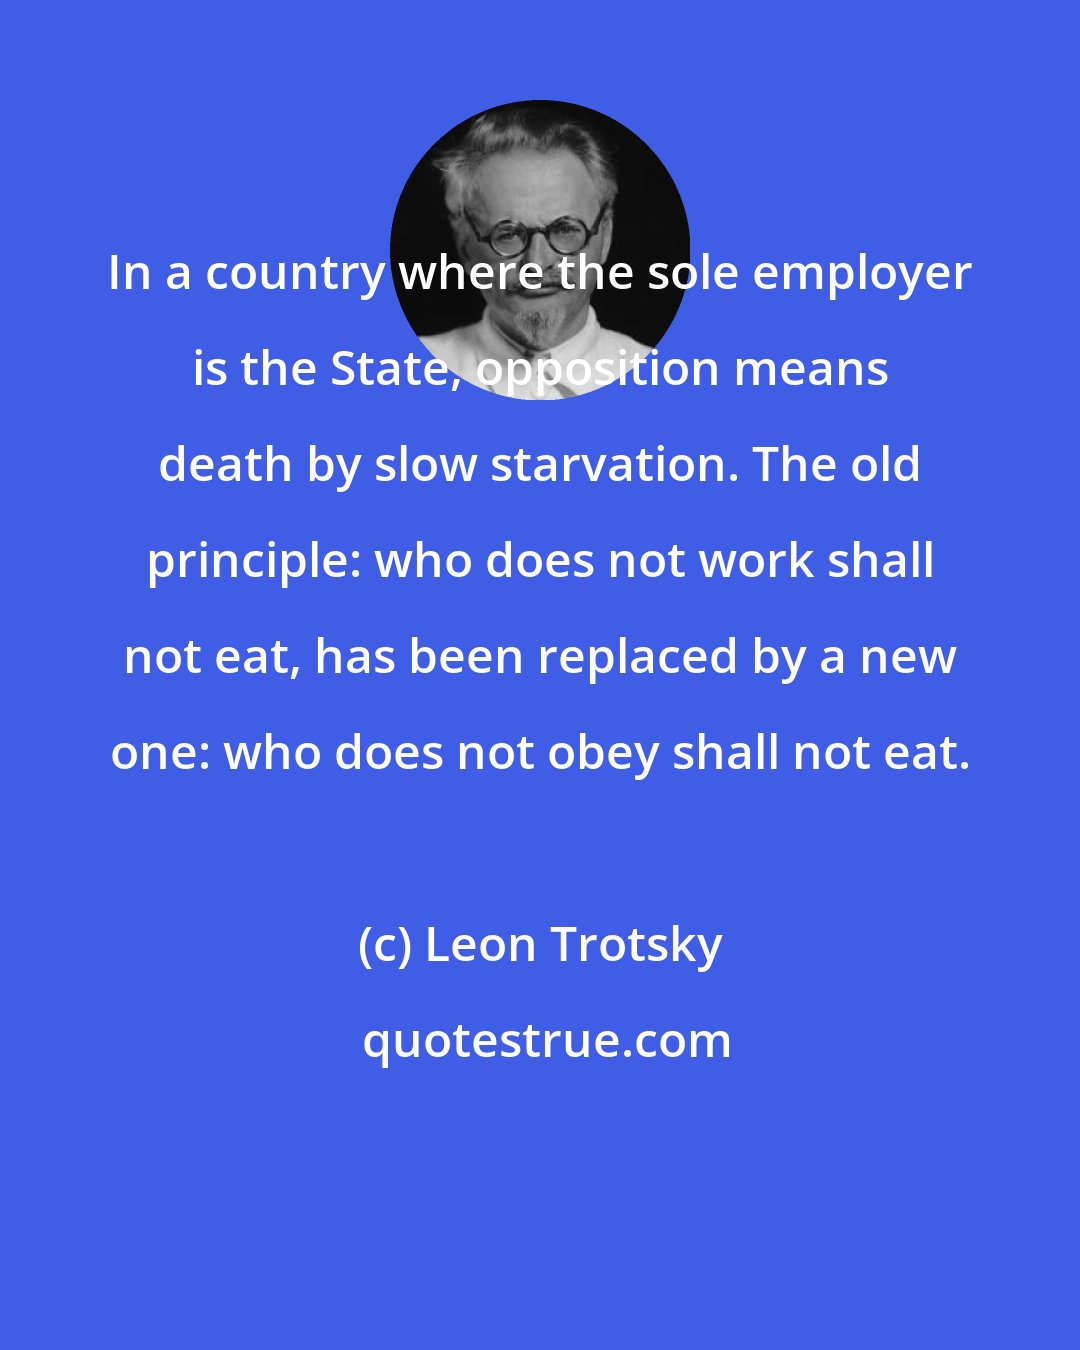 Leon Trotsky: In a country where the sole employer is the State, opposition means death by slow starvation. The old principle: who does not work shall not eat, has been replaced by a new one: who does not obey shall not eat.